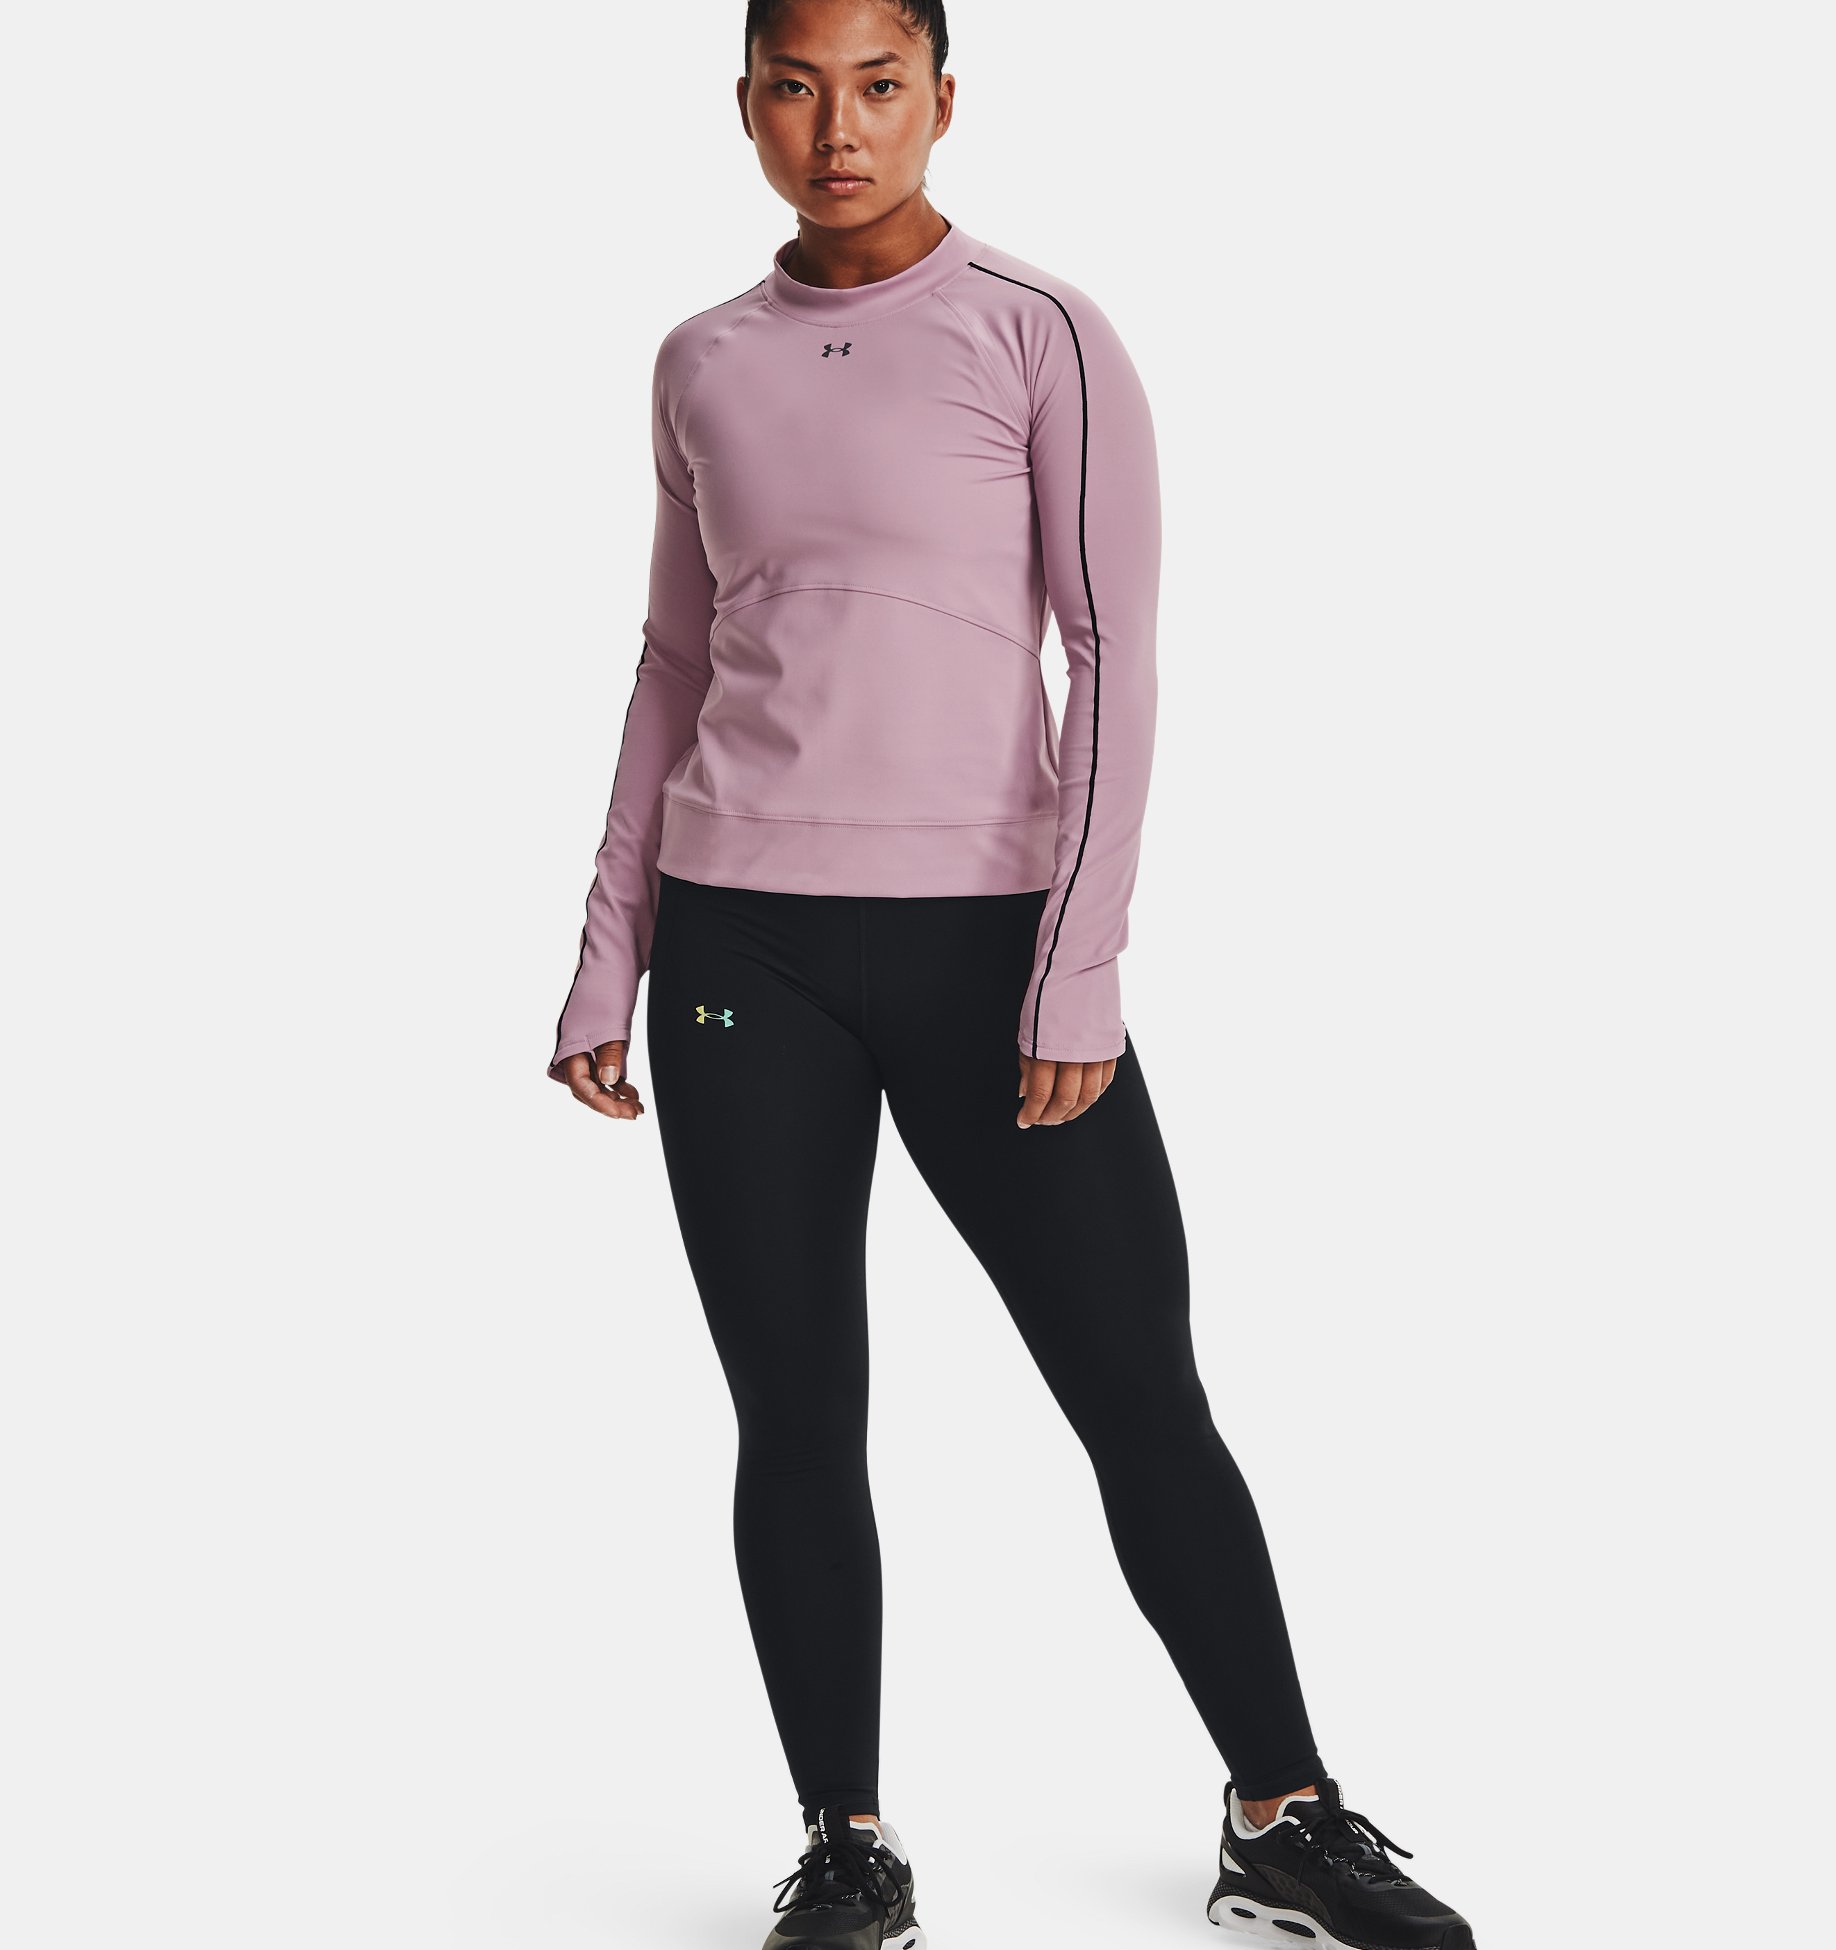 Comfortable Long Sleeve Gym Top with Rush Technology Under Armour Women’s Running Top UA Rush Functional Women’s Activewear with Tight Fit 